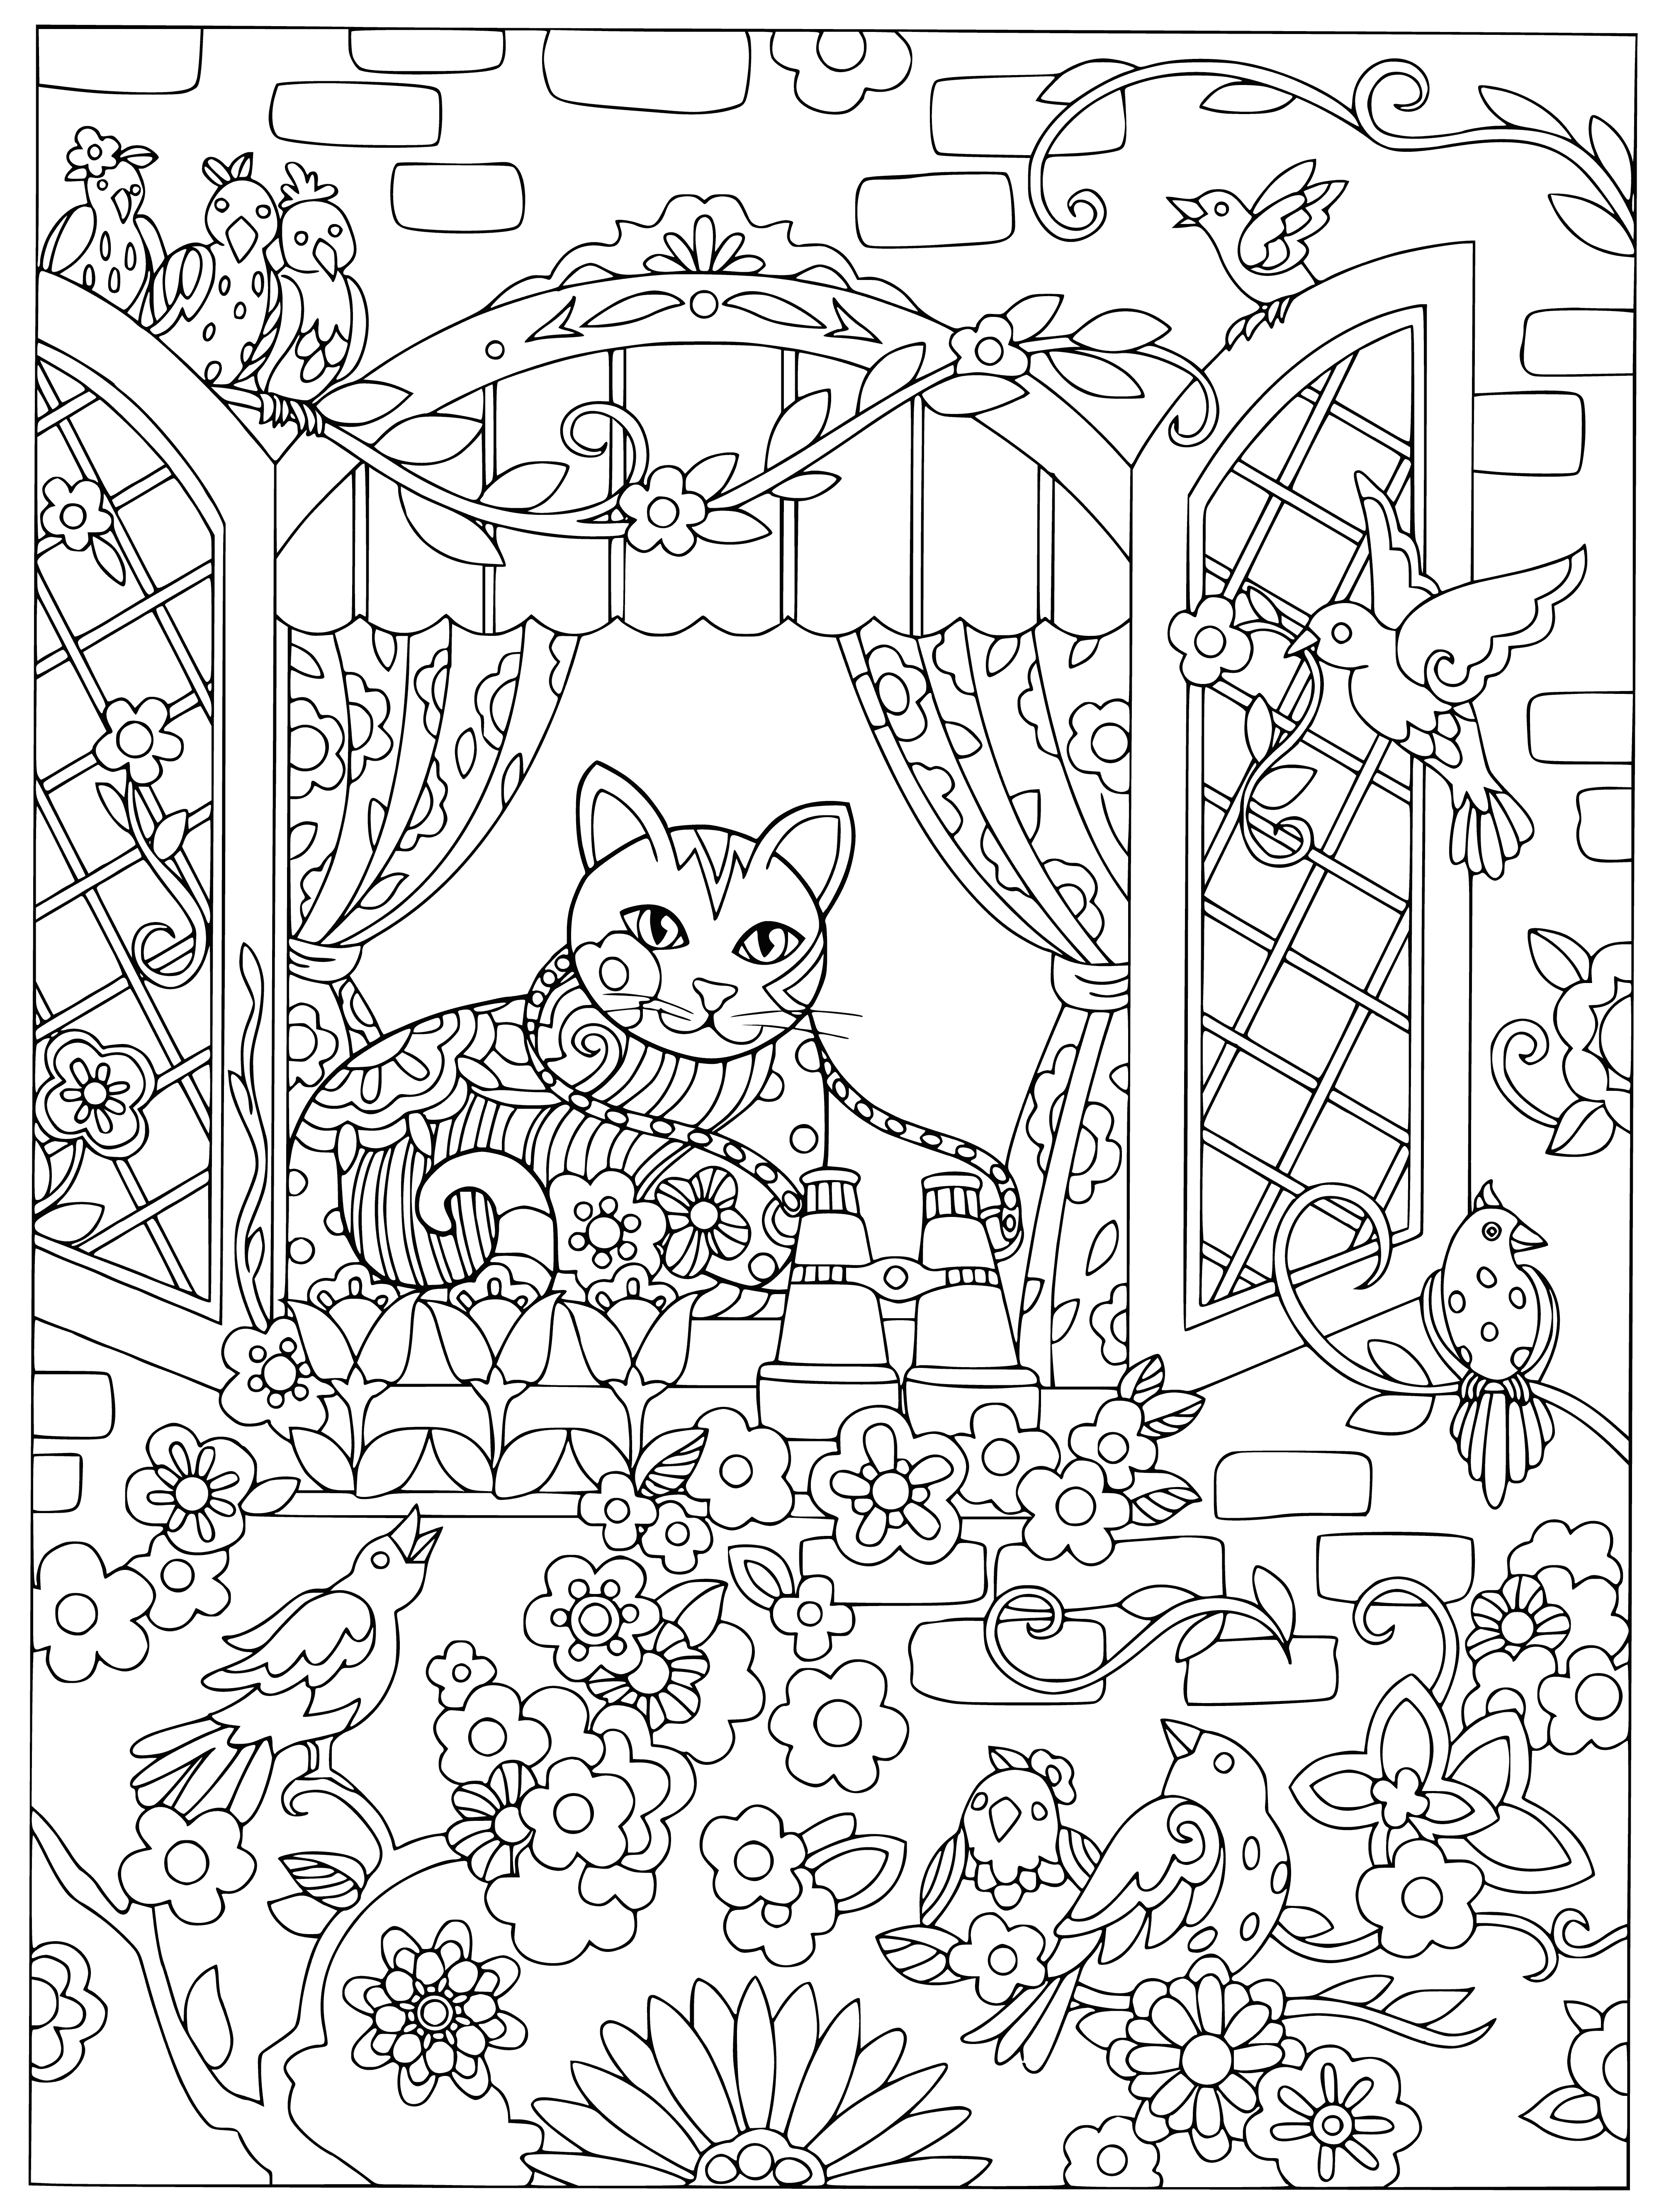 coloring page: Cat perched in window looking out at scenery, with border of black & white spiral design. #Coloring #Printables